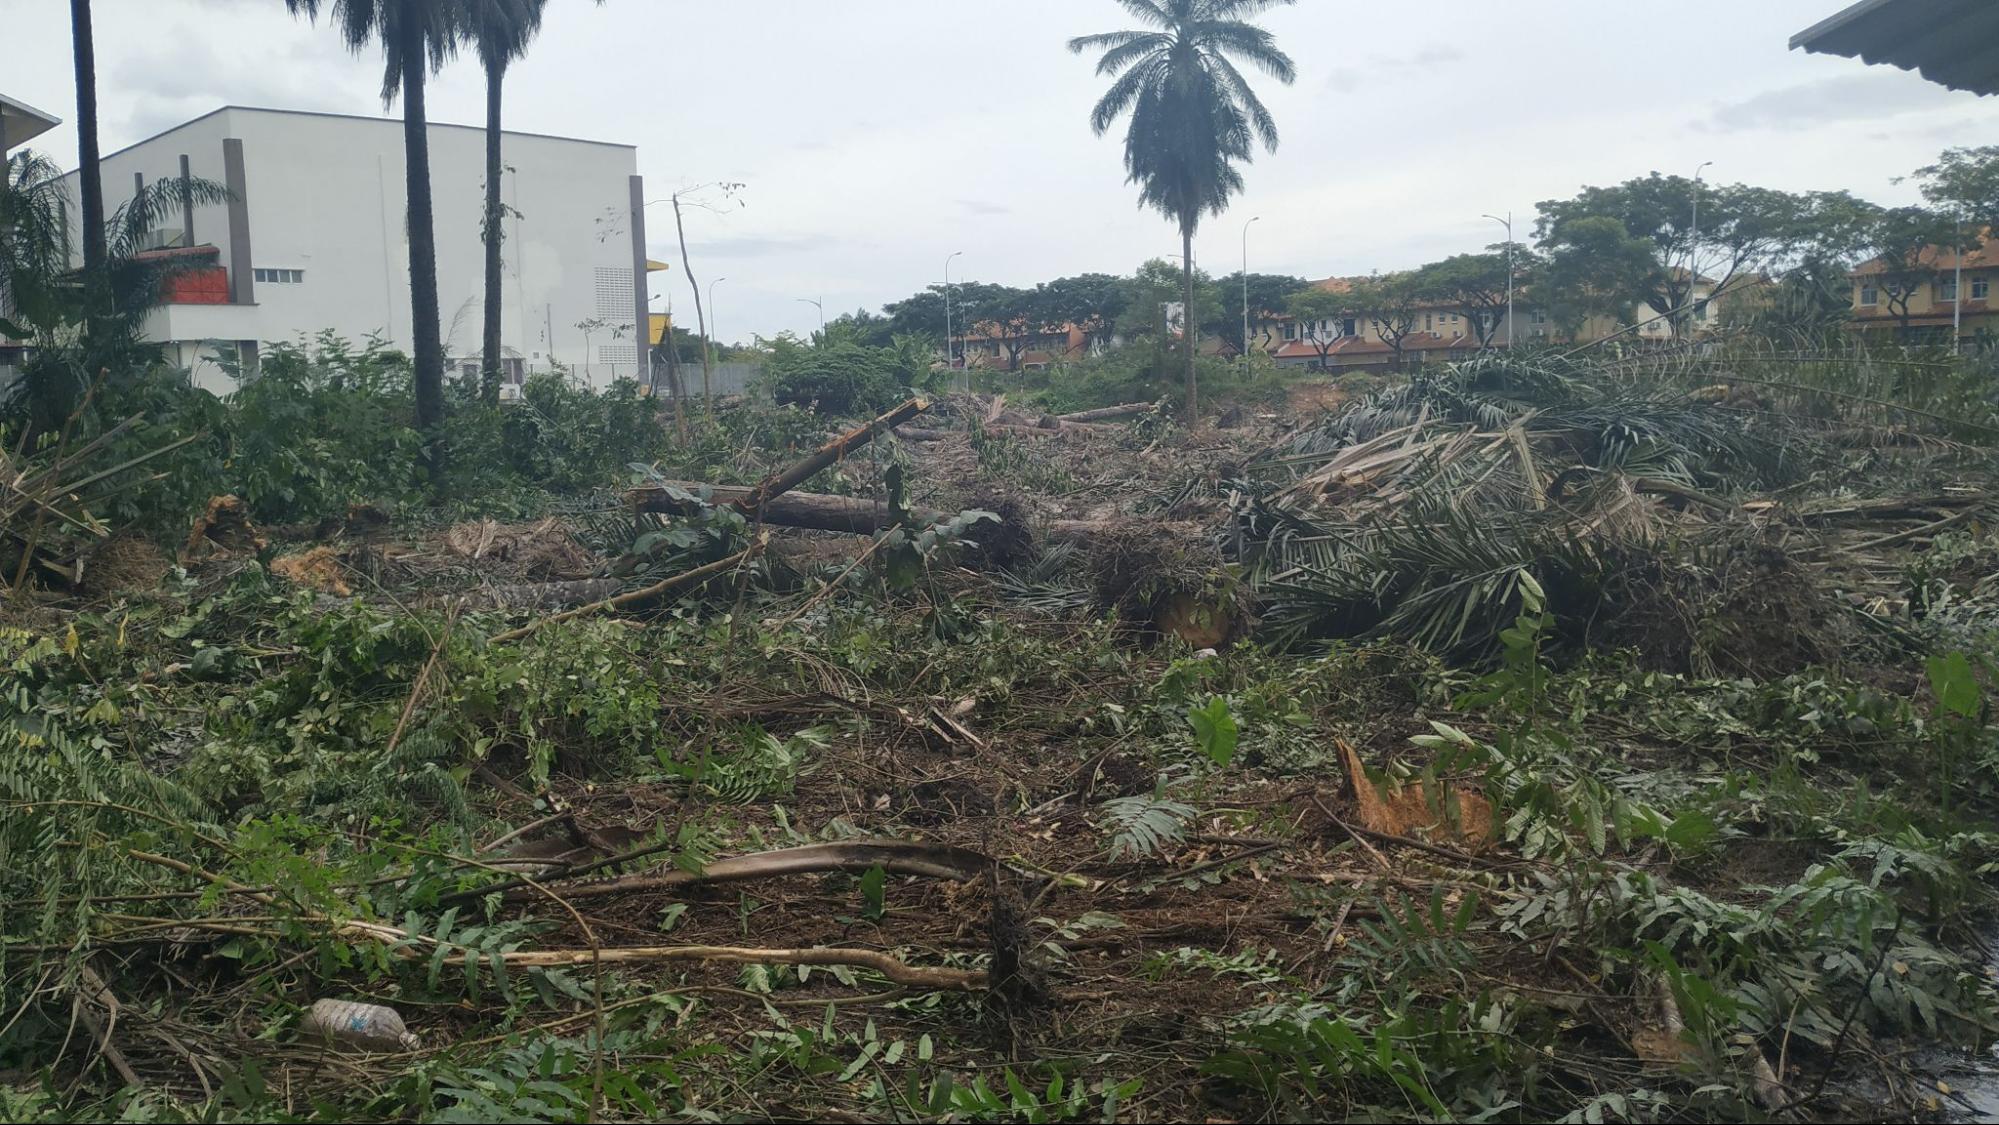 Land clearing for development